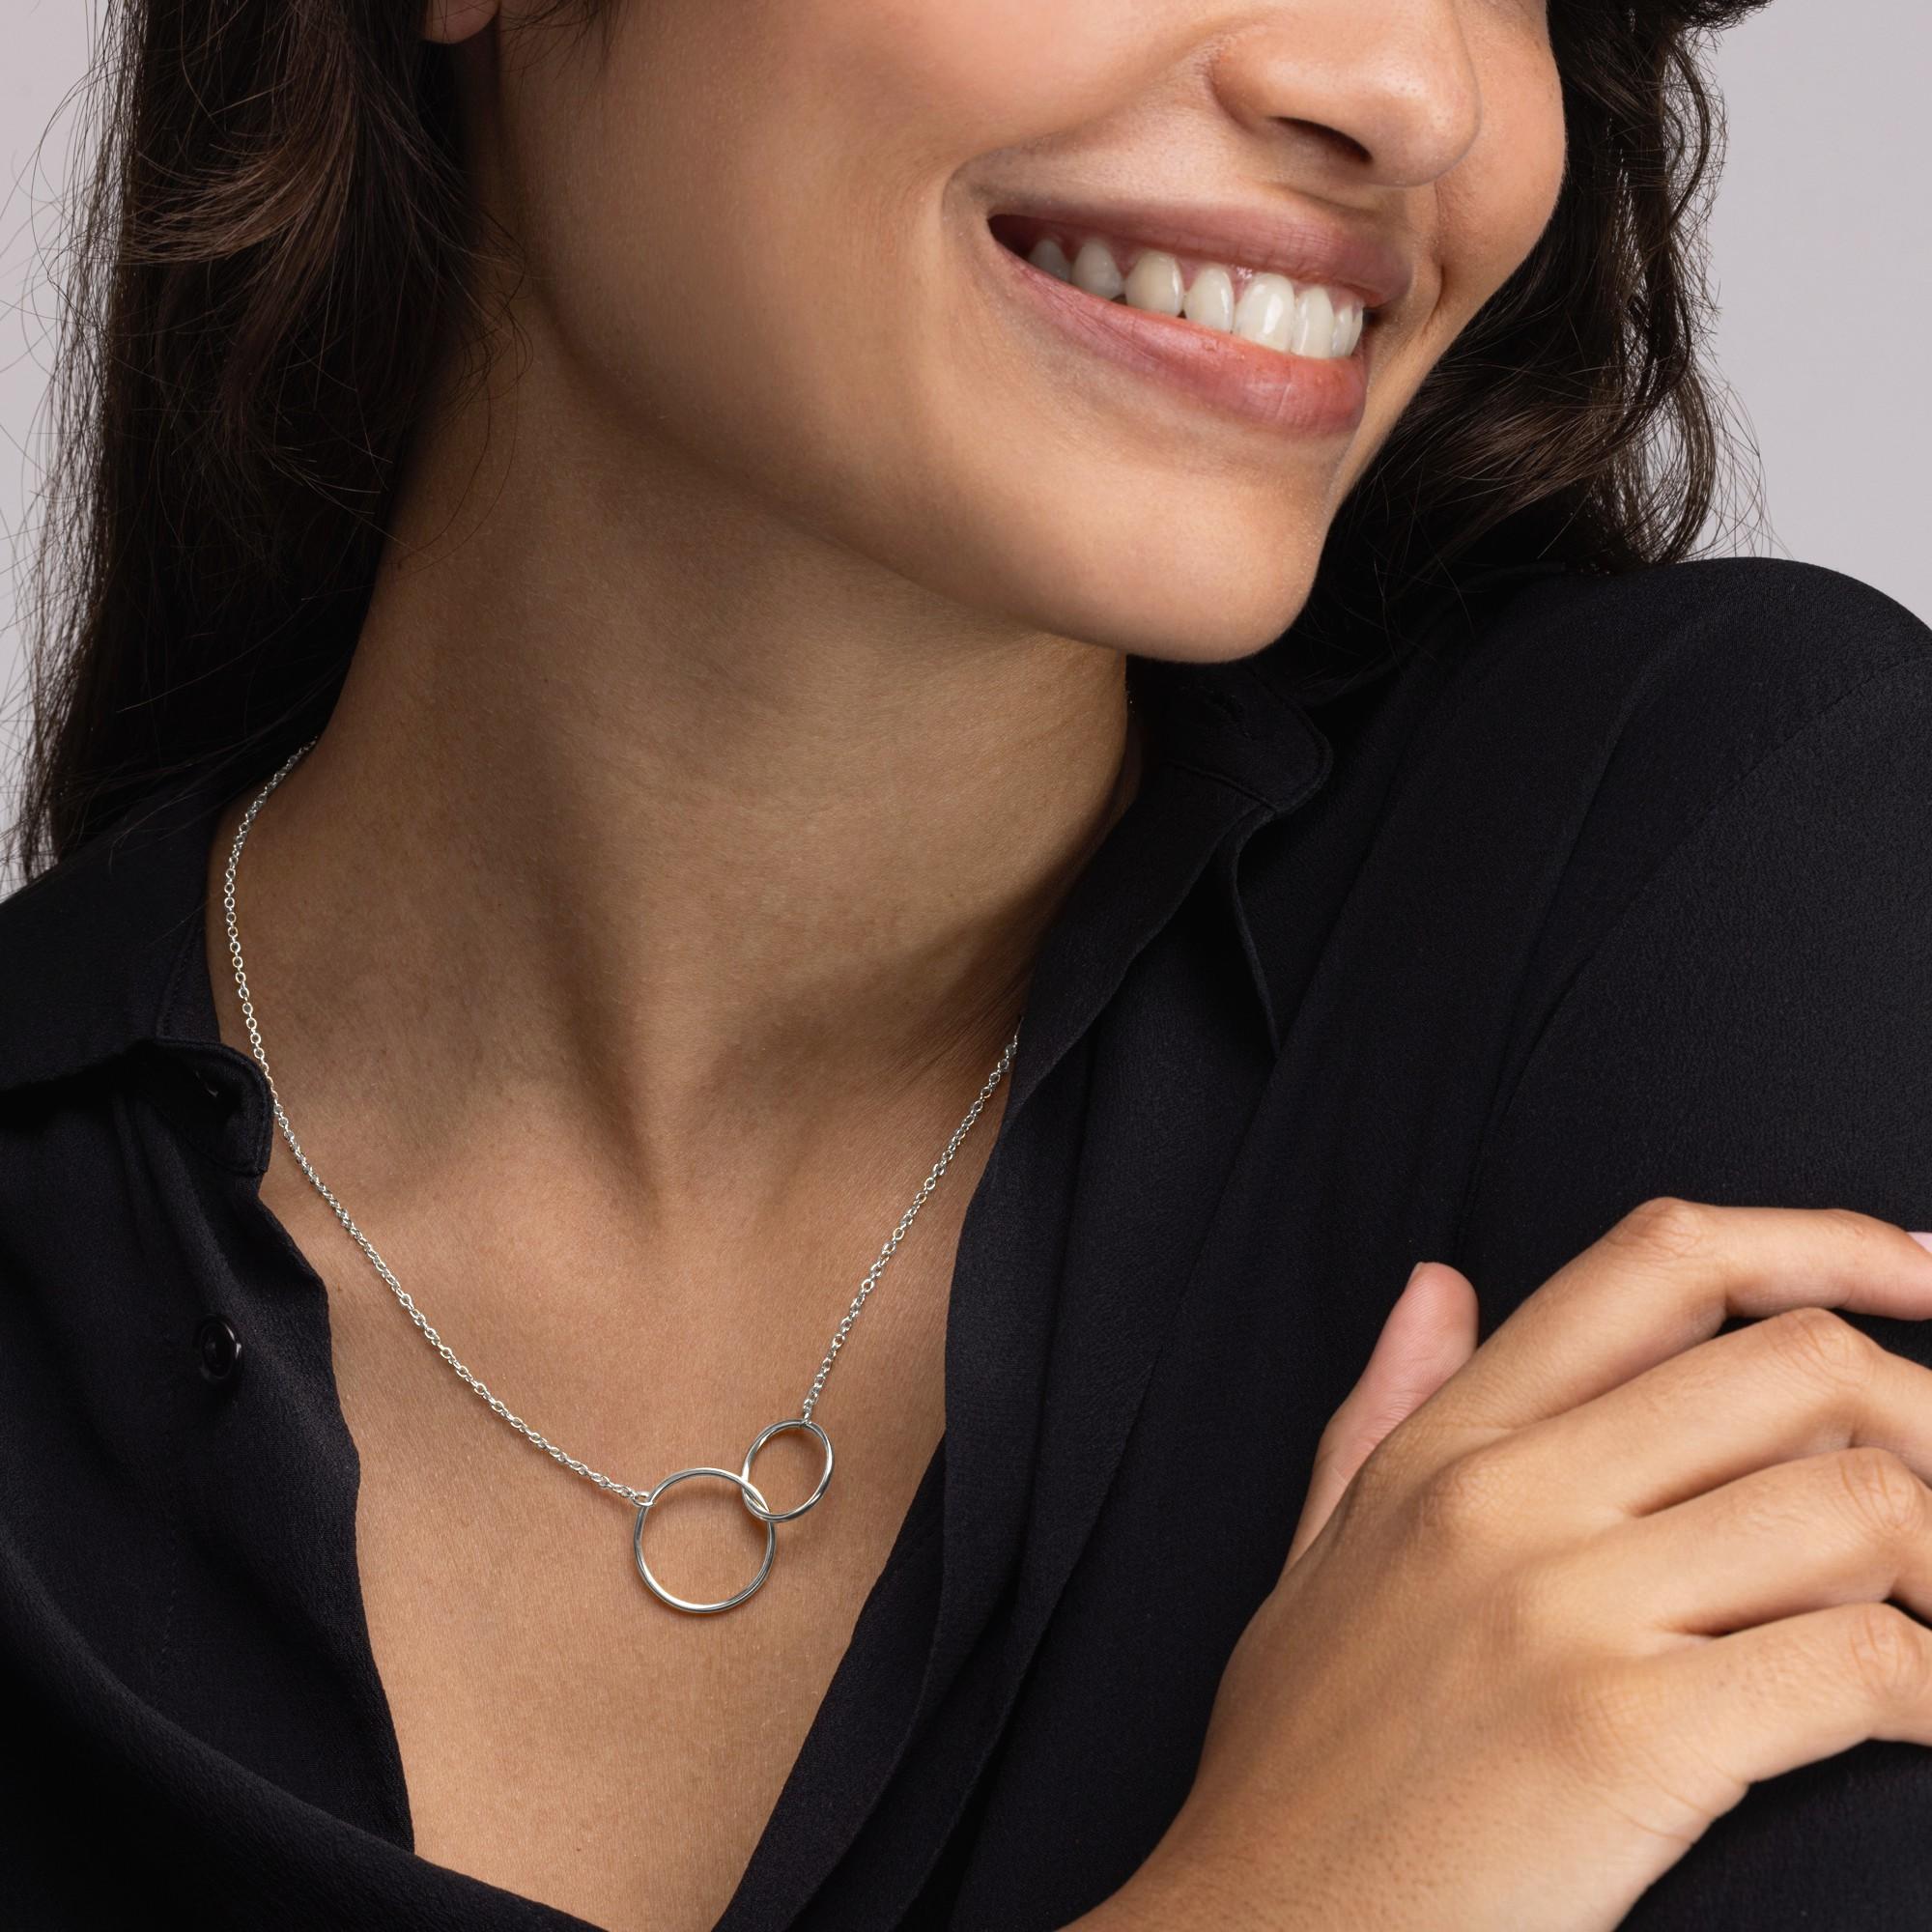 Alex Jona design collection, hand crafted in Italy, 18 karat white gold chain necklace, suspending two interlocking hoops.
Alex Jona jewels stand out, not only for their special design and for the excellent quality of the gemstones, but also for the